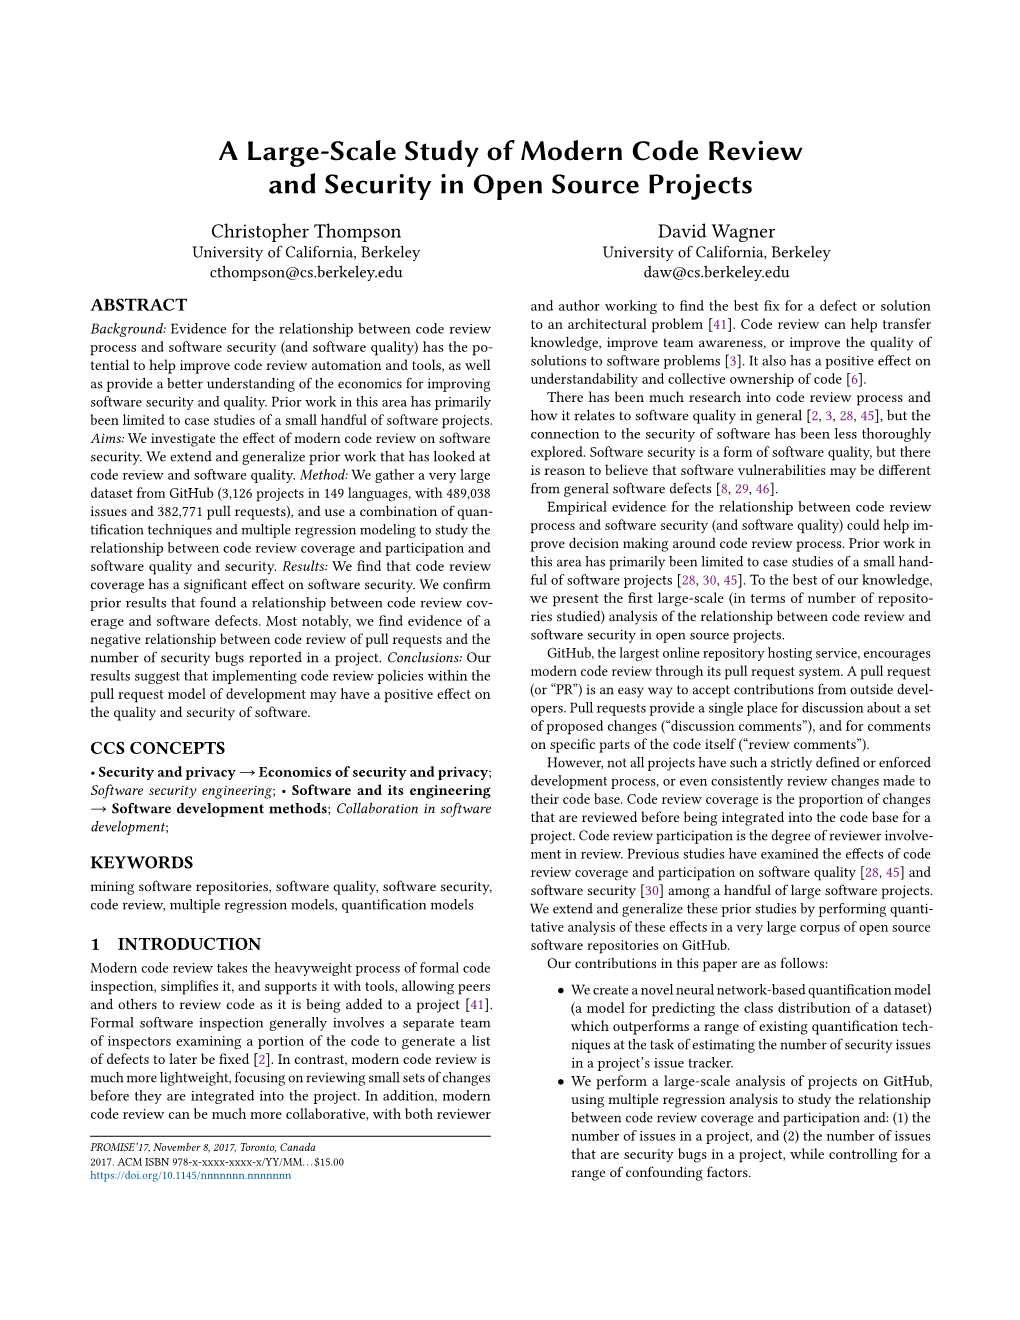 A Large-Scale Study of Modern Code Review and Security in Open Source Projects